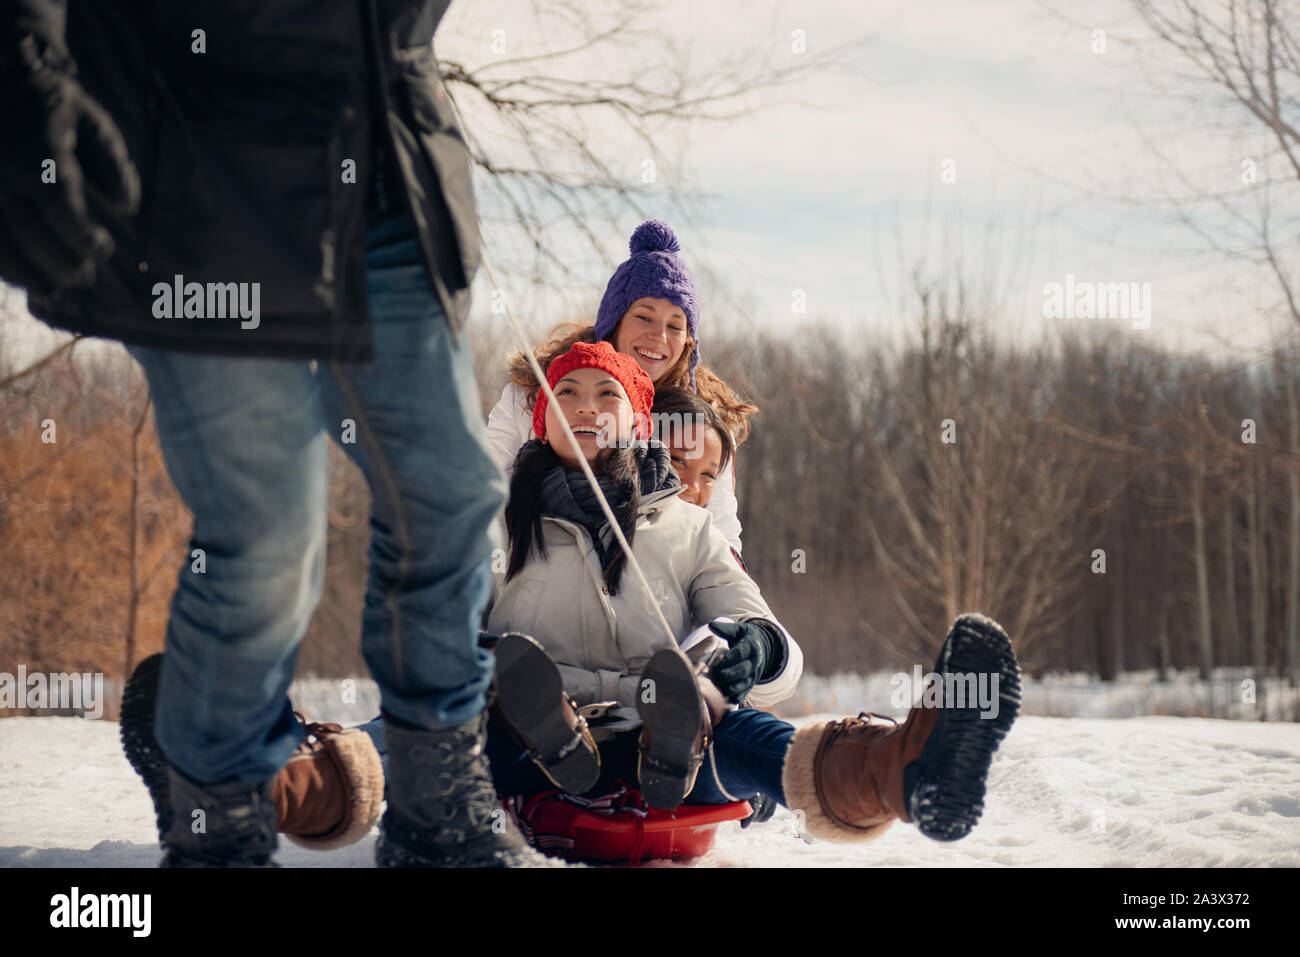 Group of millenial young adult friends enjoying wintertime and sledding in a snow filled park Stock Photo